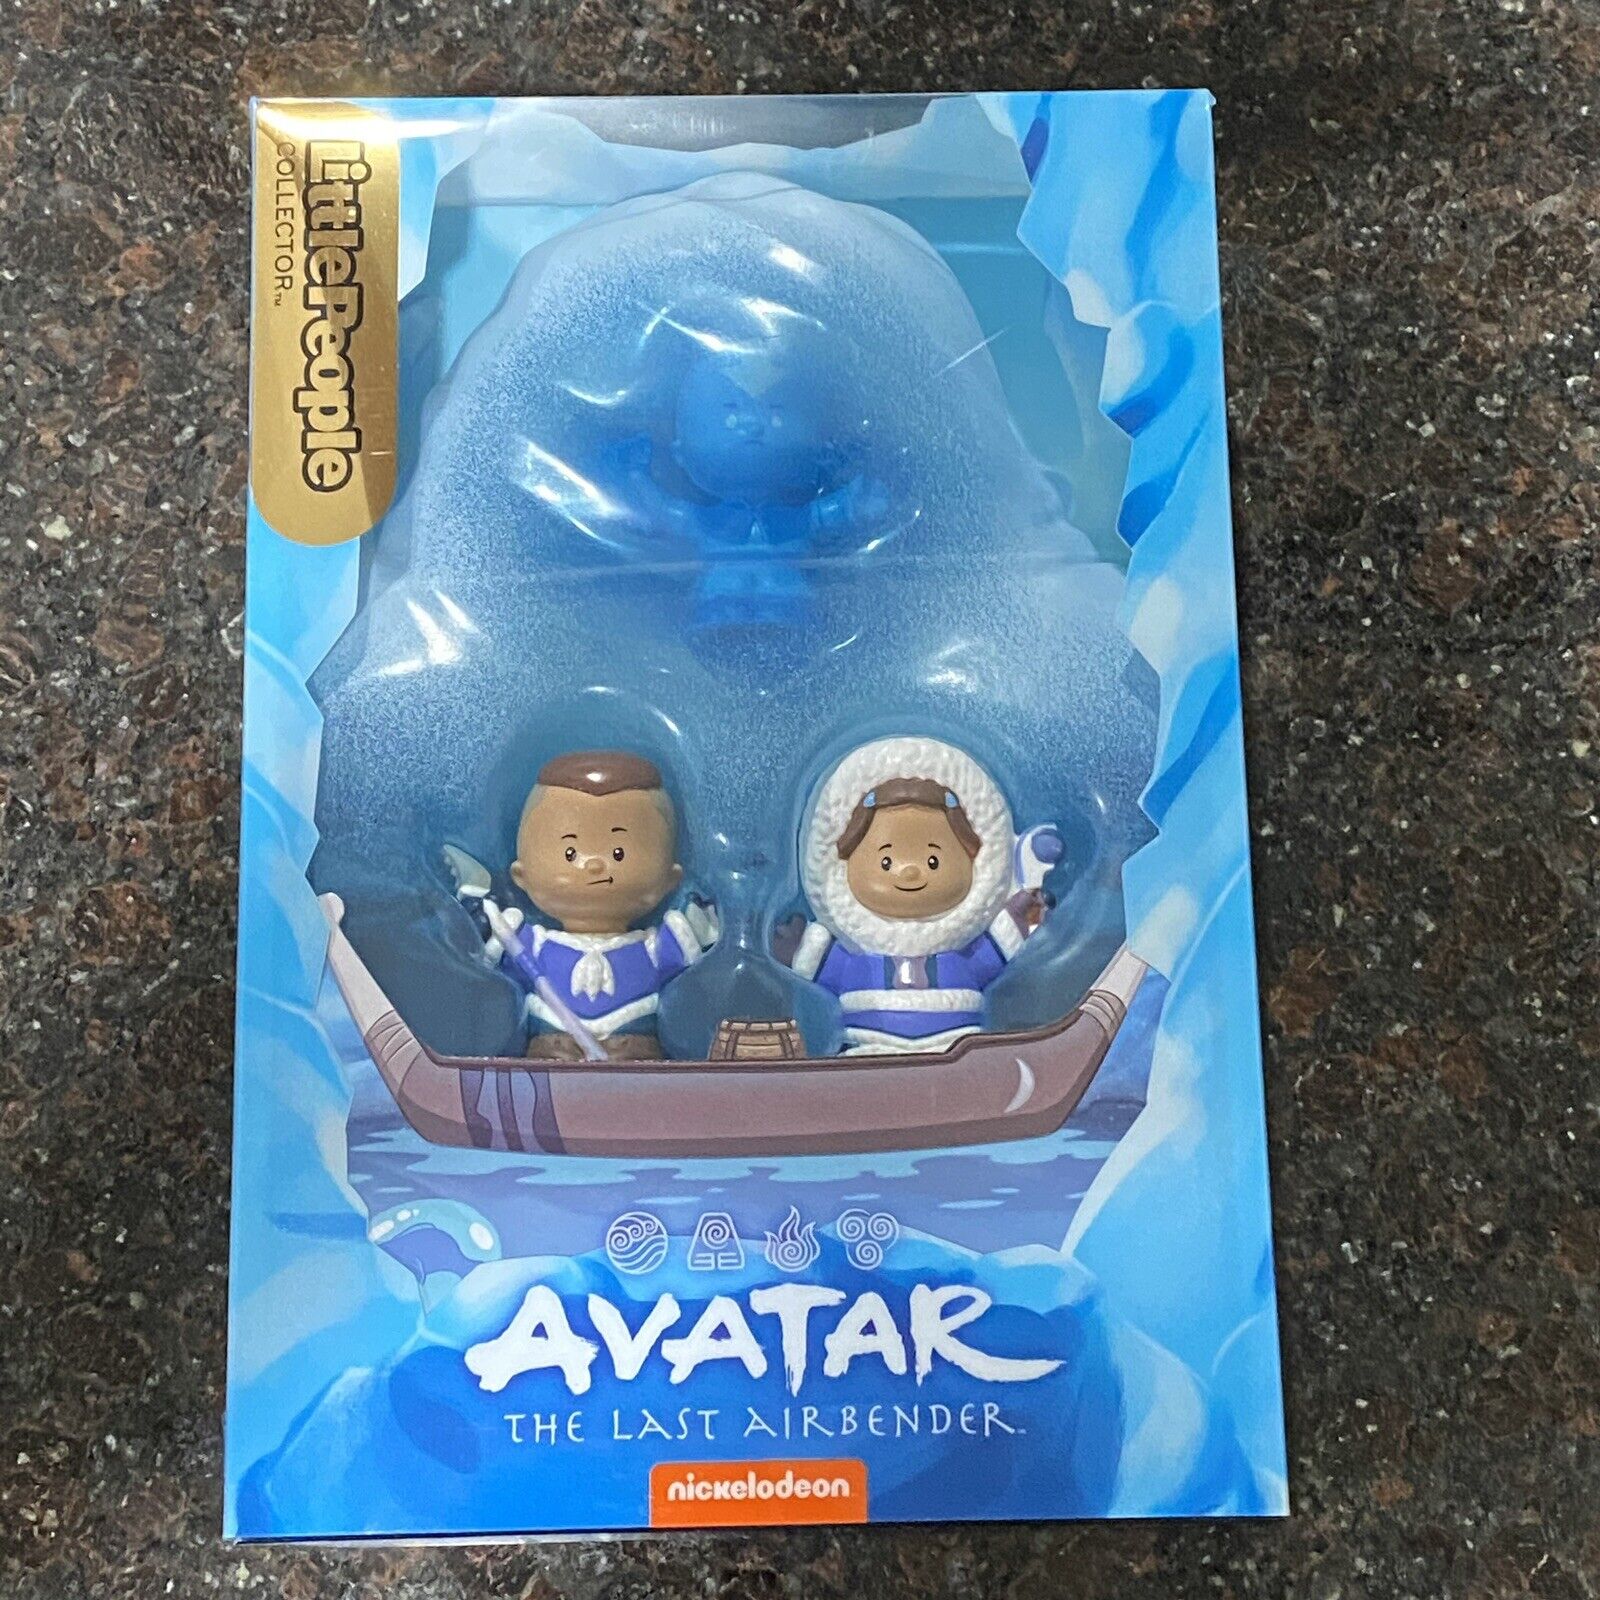 SDCC 2023 MATTEL EXCLUSIVE LITTLE PEOPLE AVATAR THE LAST AIRBENDER SET *IN HAND*